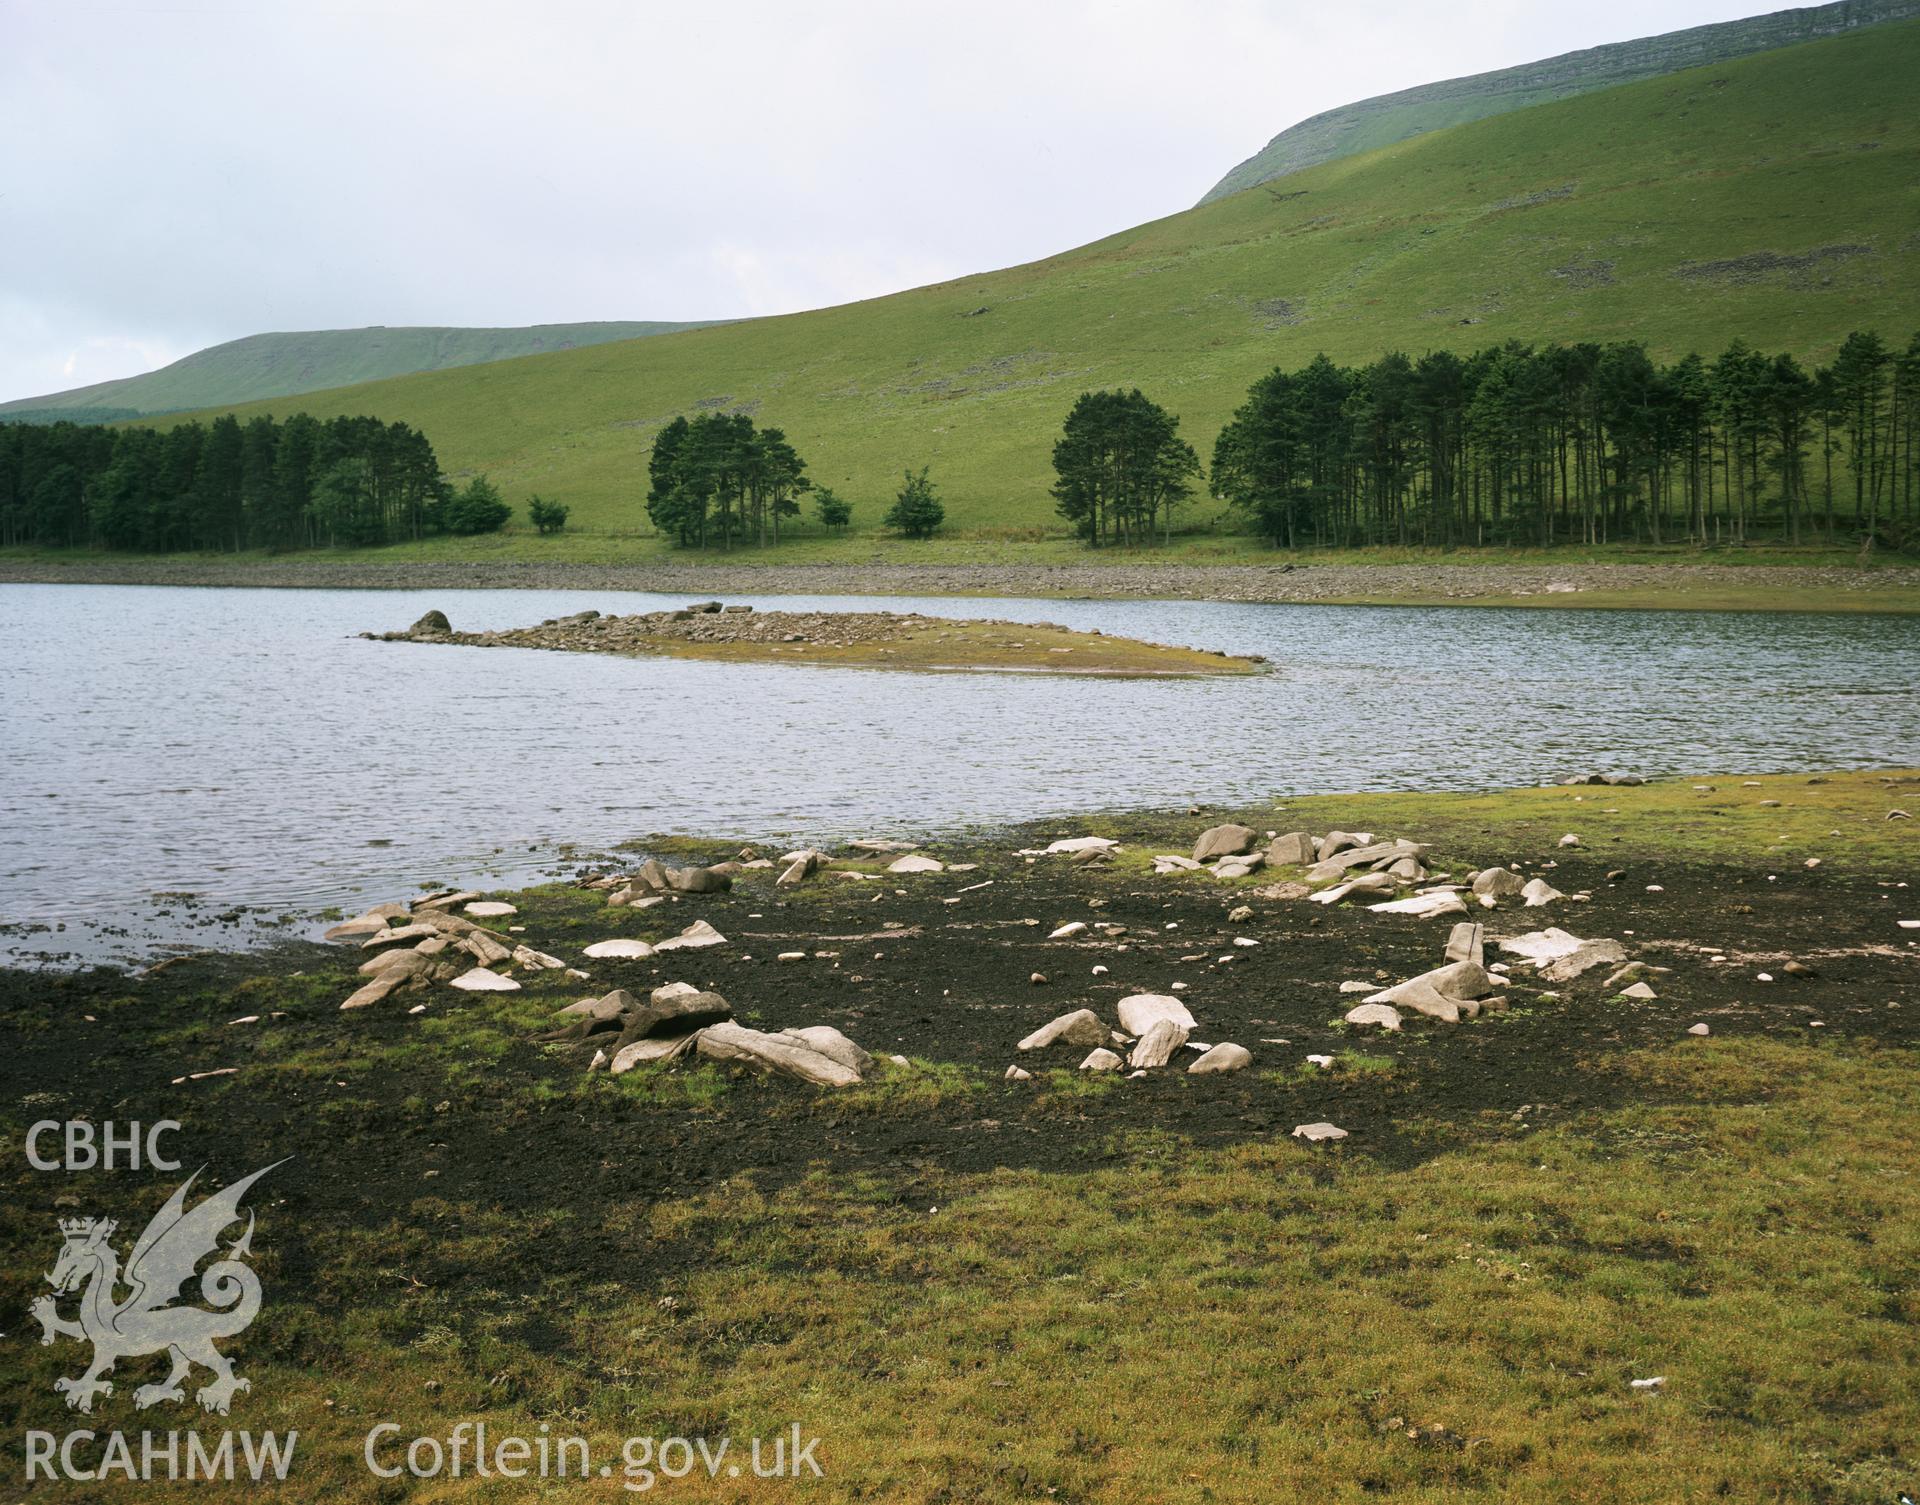 RCAHMW colour transparency showing cairn Upper Neuadd Reservoir, taken by RCAHMW 1981